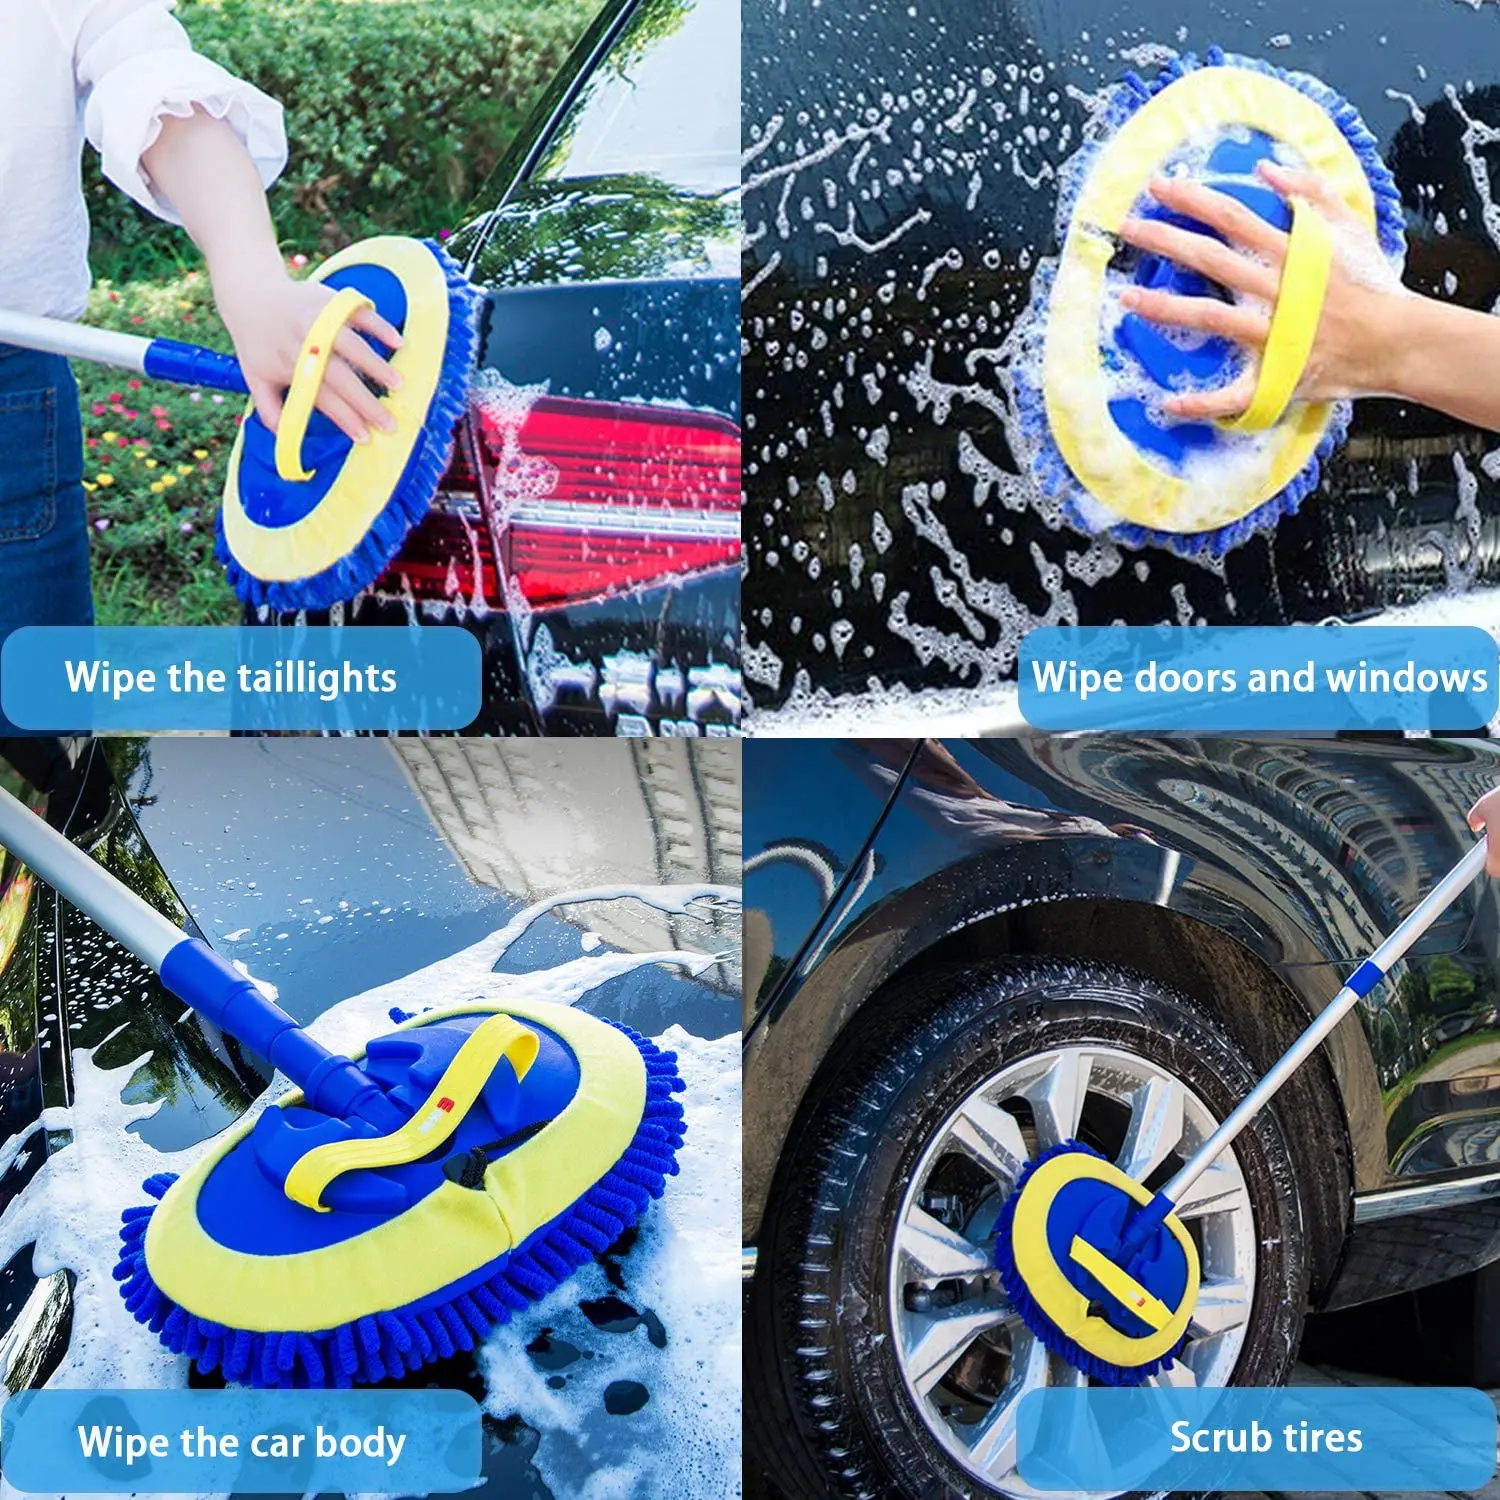 

4pcs Car Wash Mop Brush 45" Long Aluminum Alloy With Extendable Handle Super absorbent For Window Squeegee Wiper Washing Tool